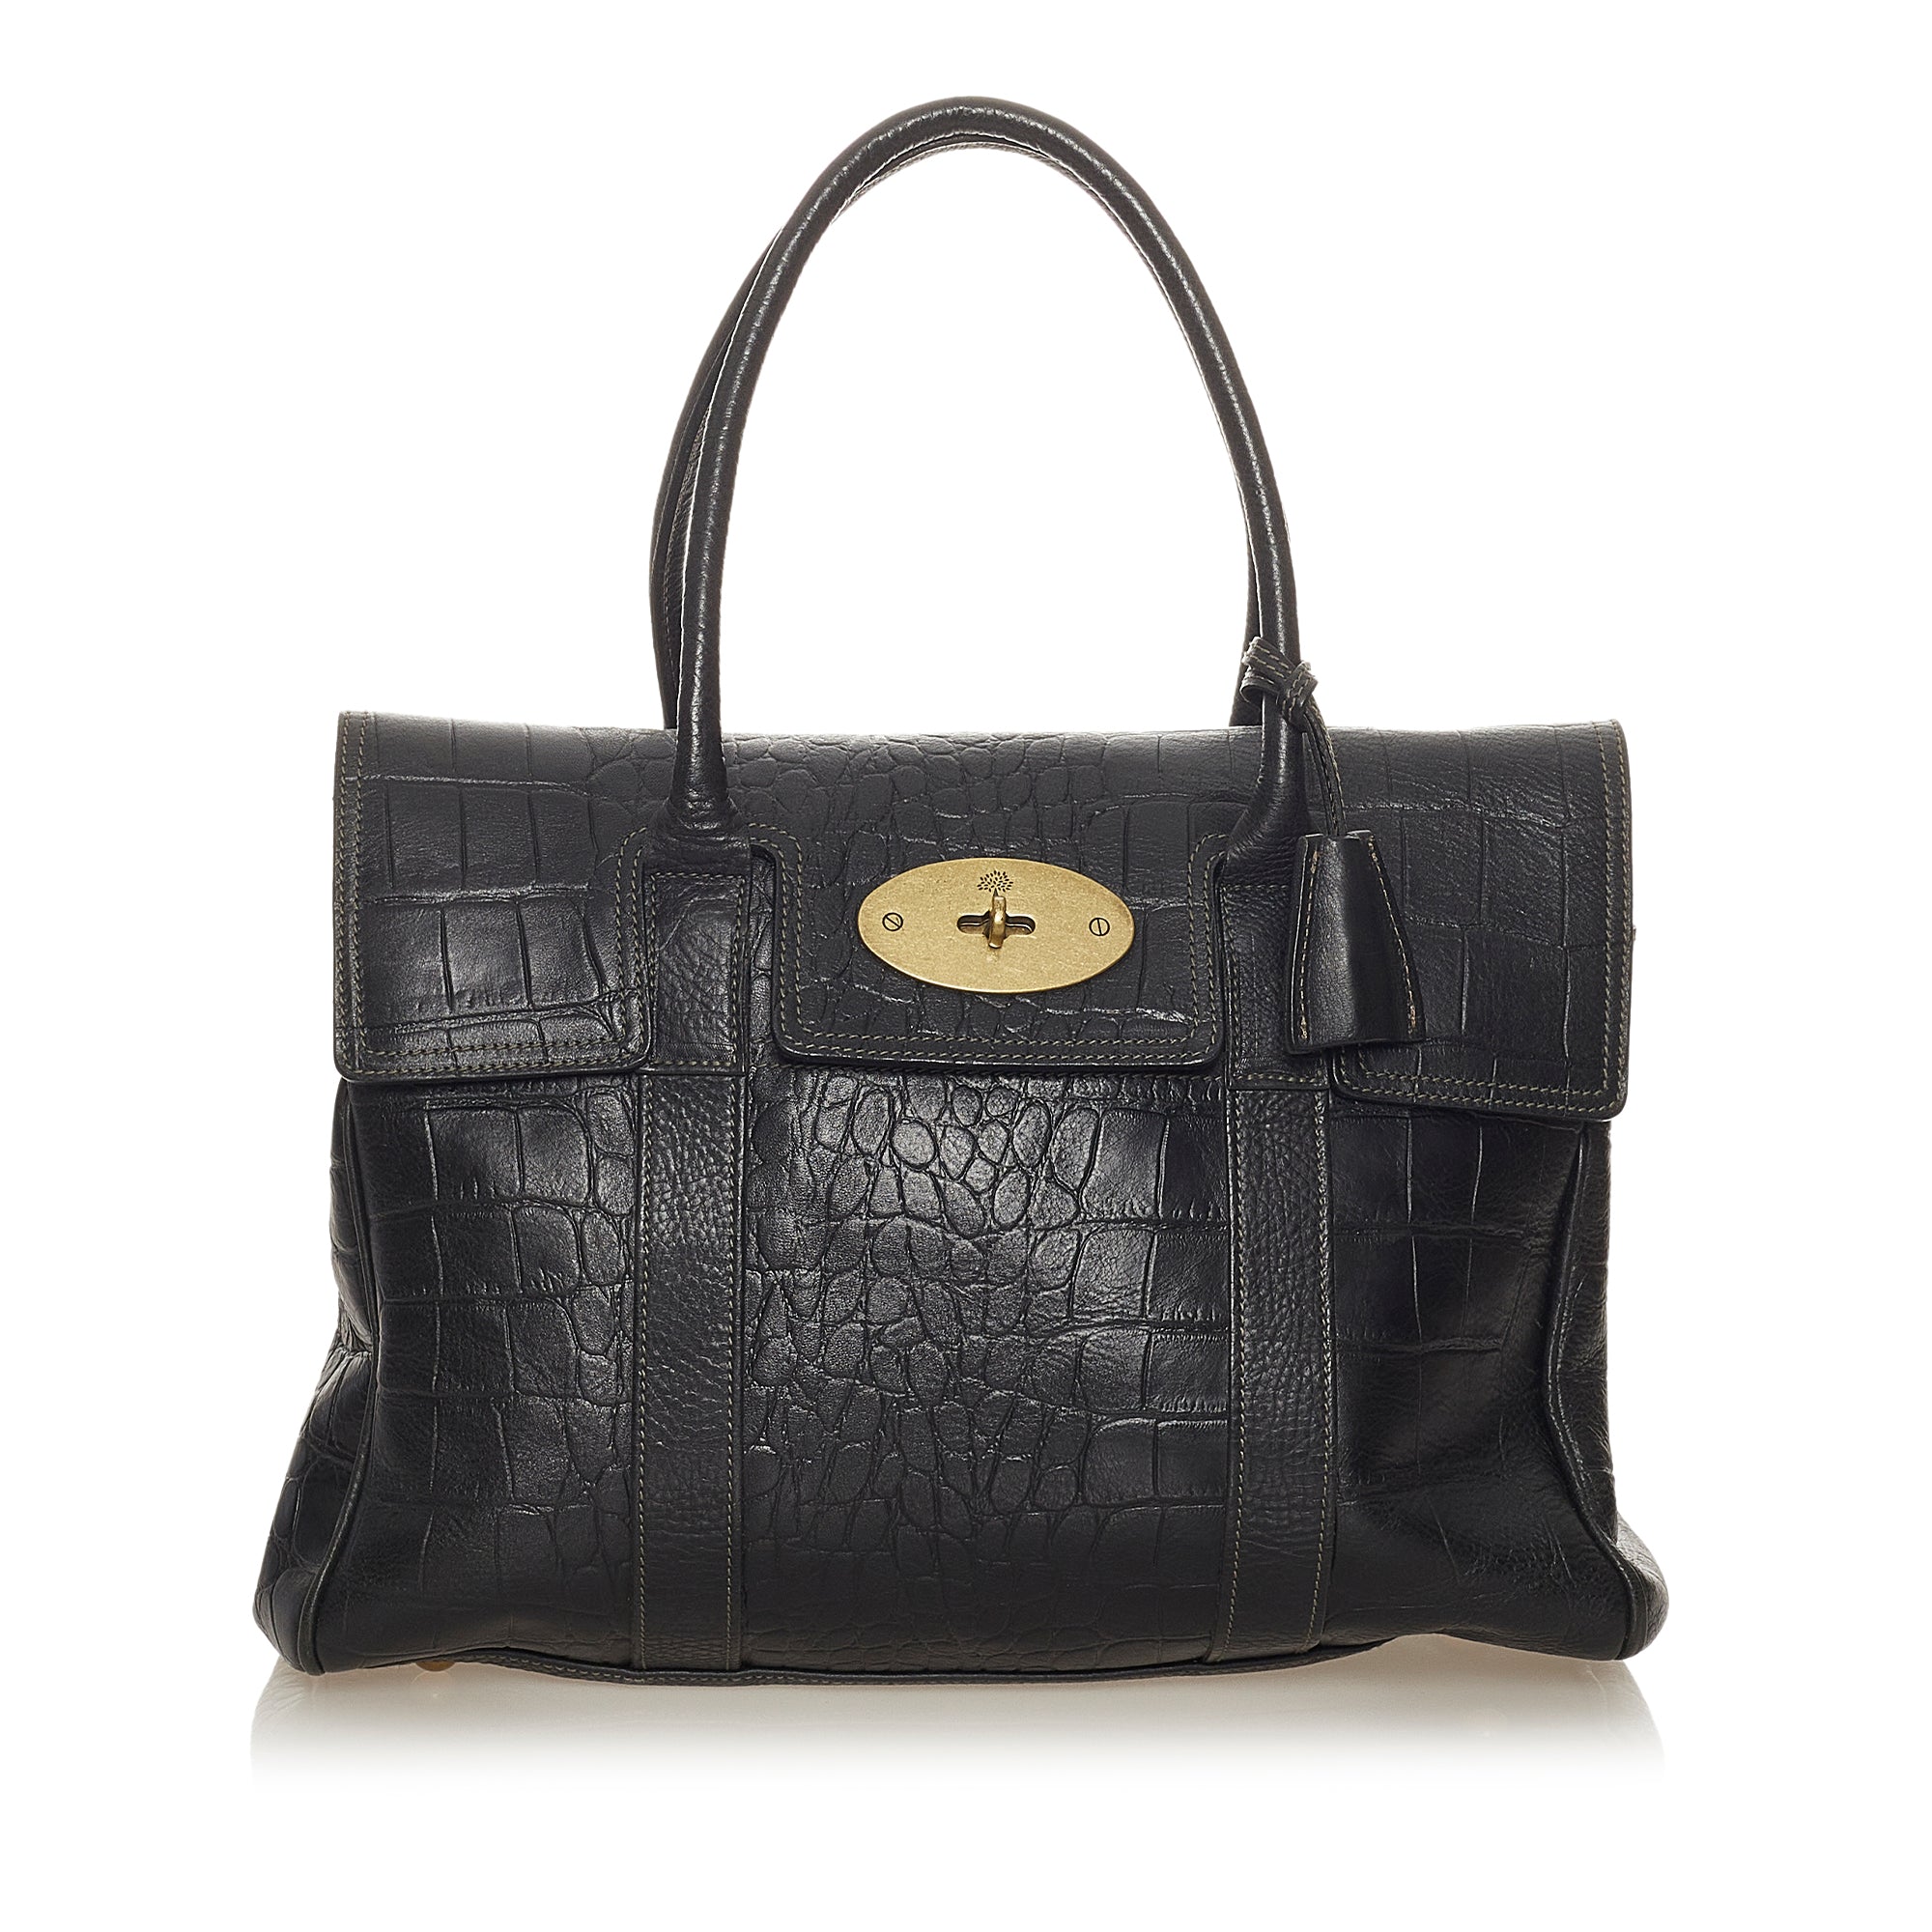 Mulberry Black Bayswater Leather Tote Bag